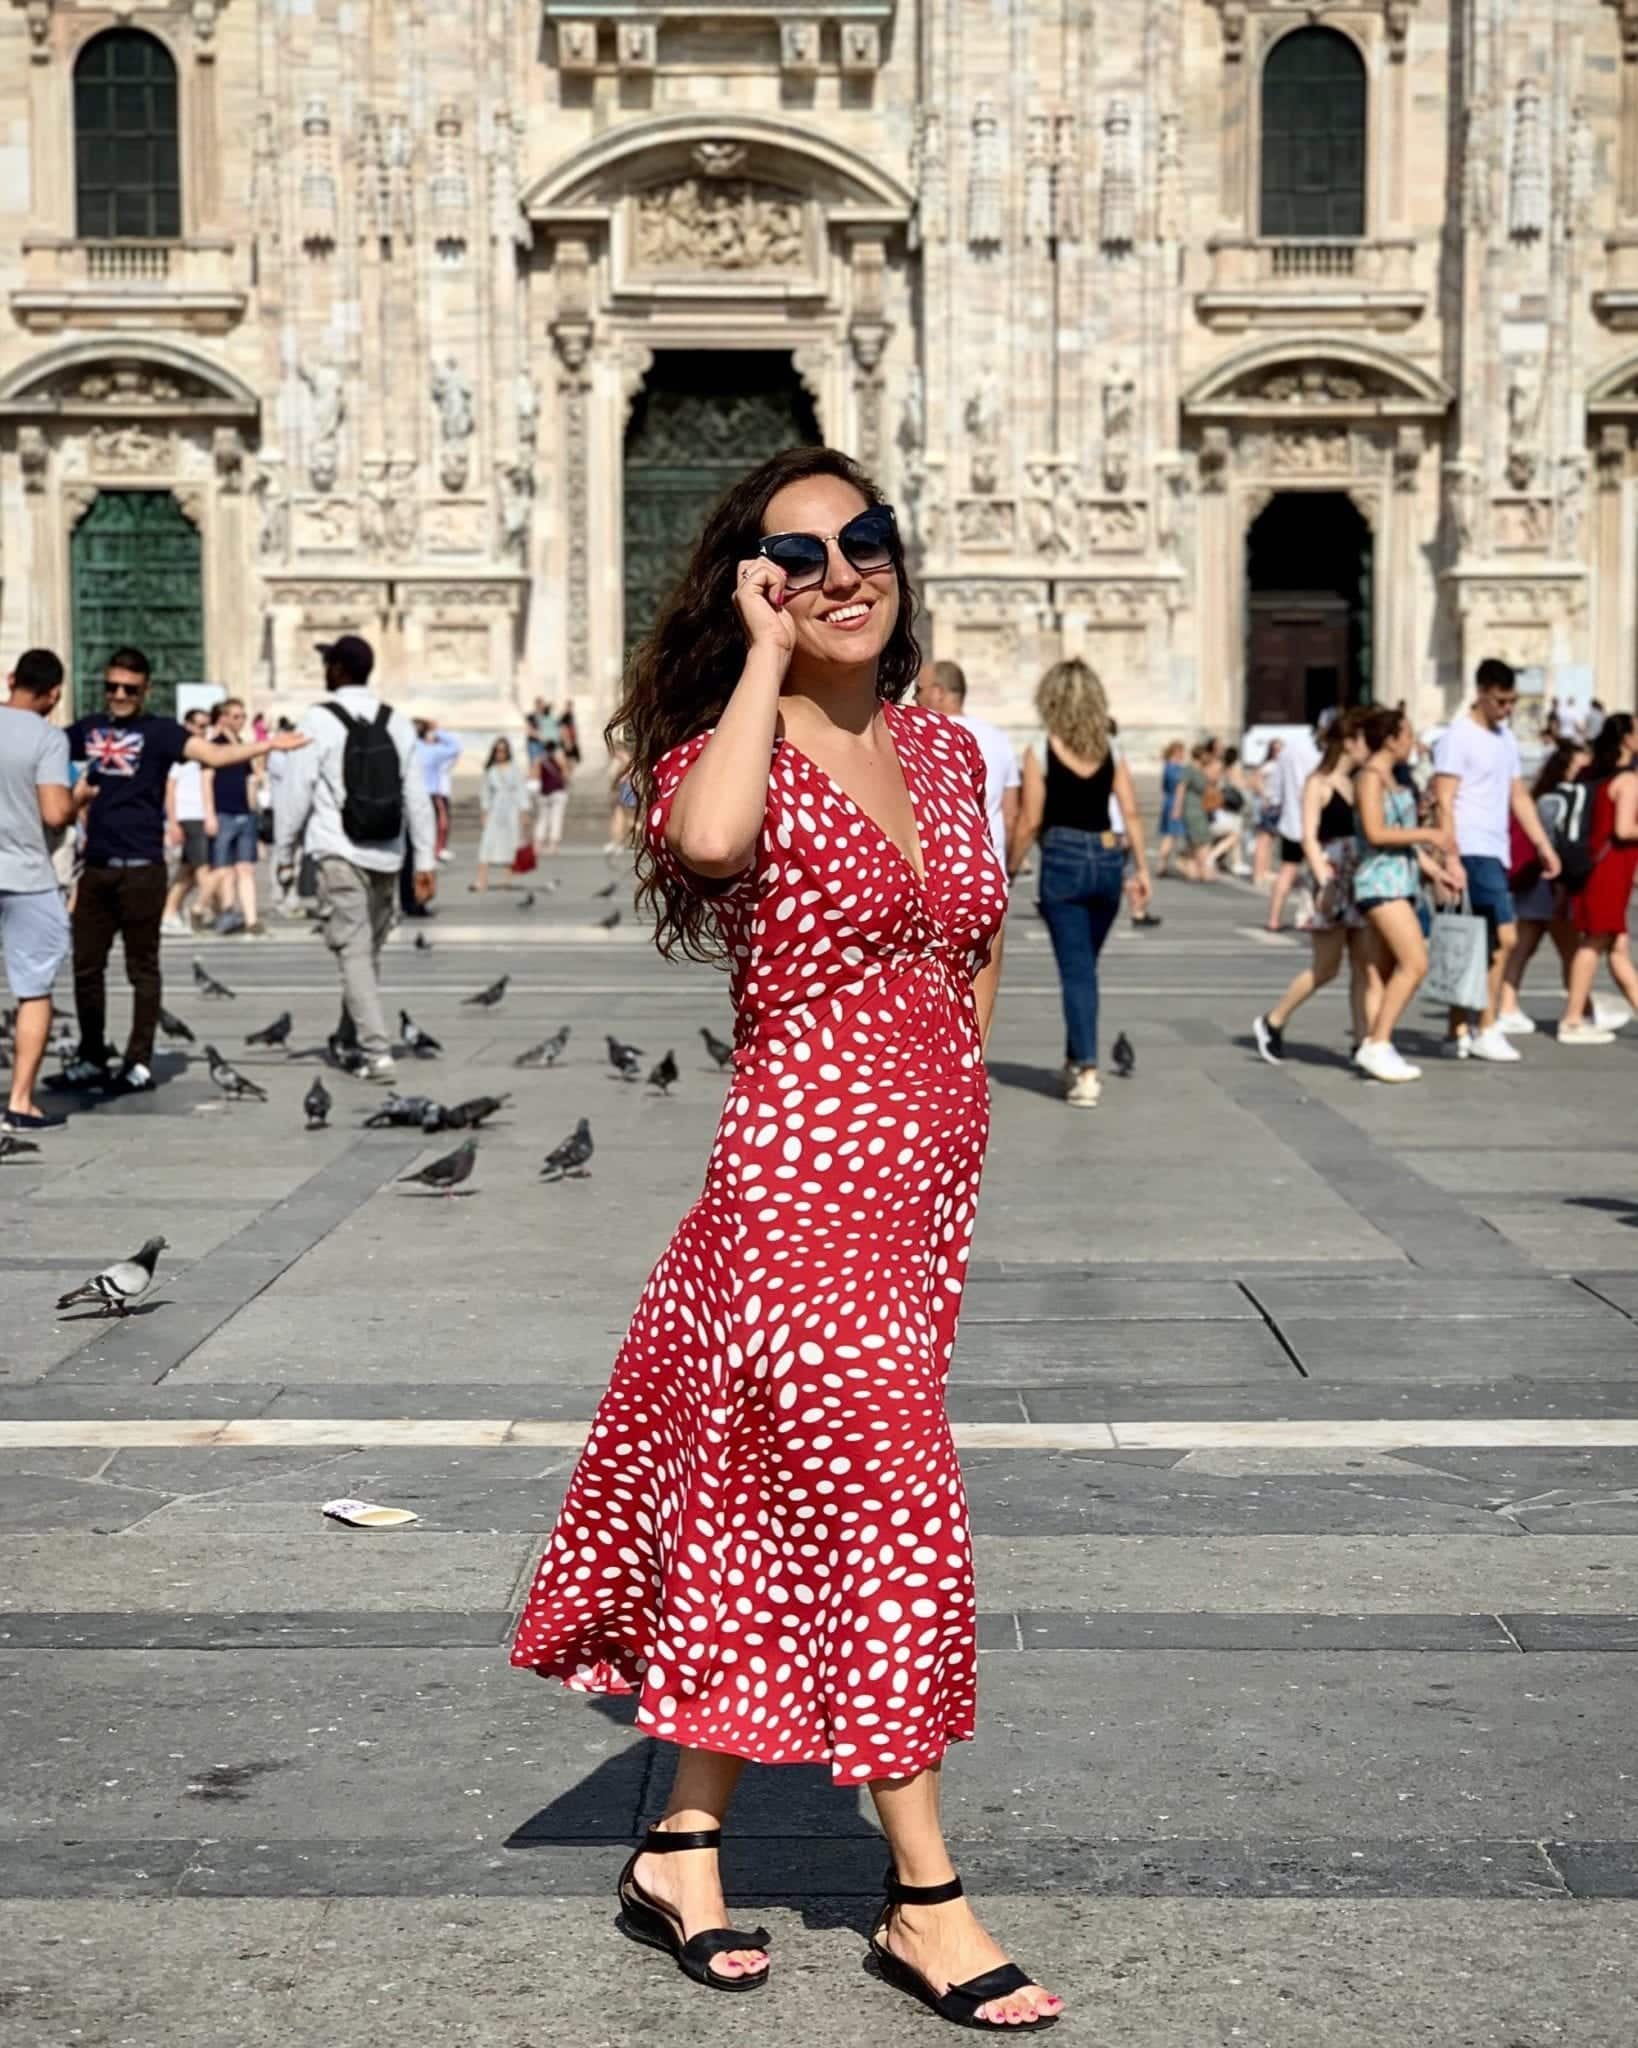 Kate wears a long red short-sleeved dress covered with white polka dots of various sizes and black sandals. She wears black sunglasses and poses as if about to take them off with one hand. She is standing in front of Milan's Duomo and in the background you can see pigeons and people taking pictures in front of it.